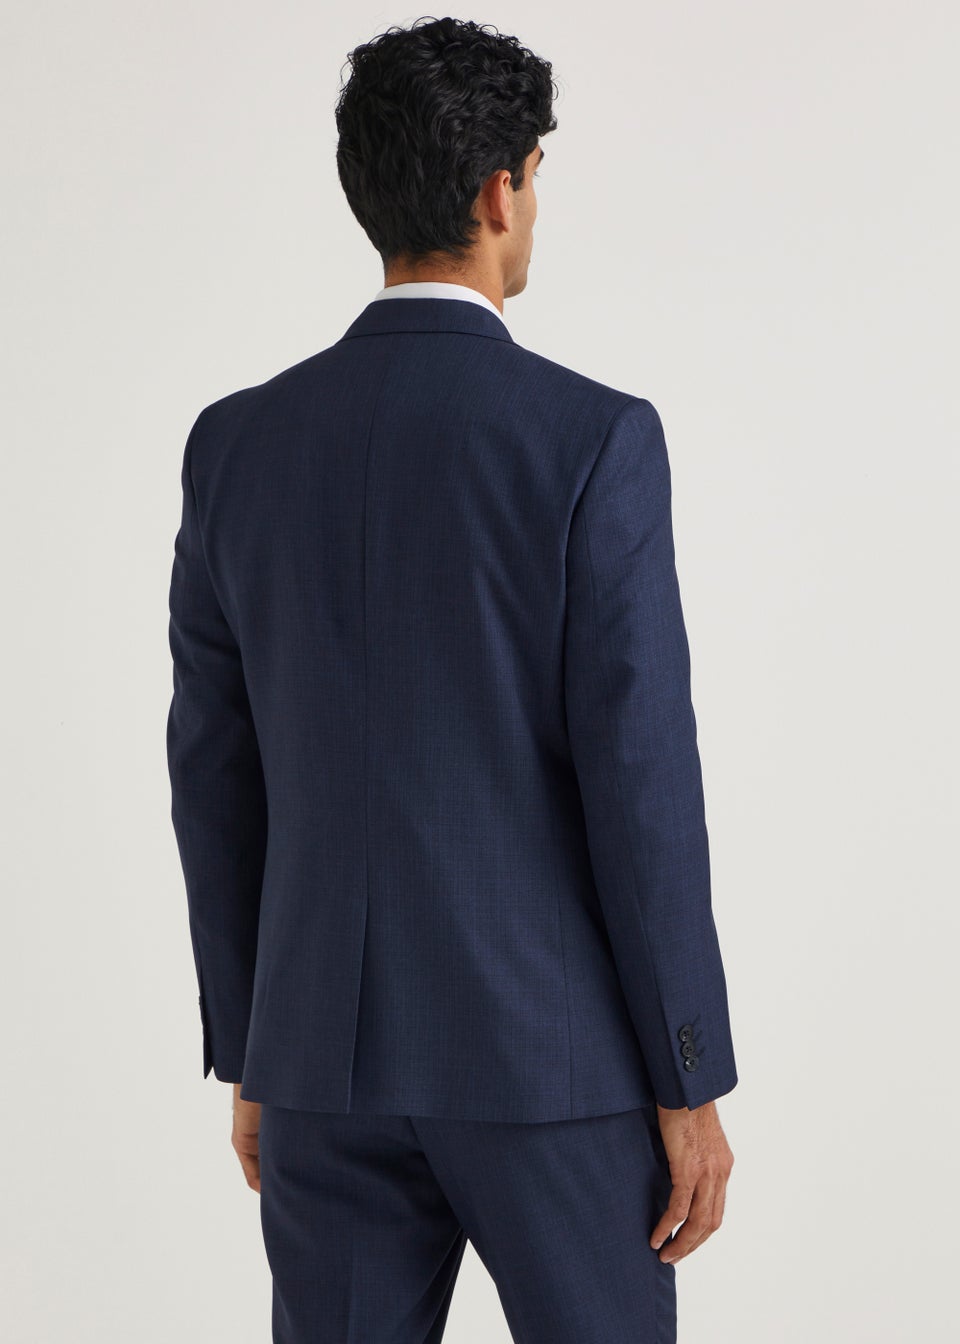 Taylor & Wright Cooper Navy Slim Fit Suit Jacket